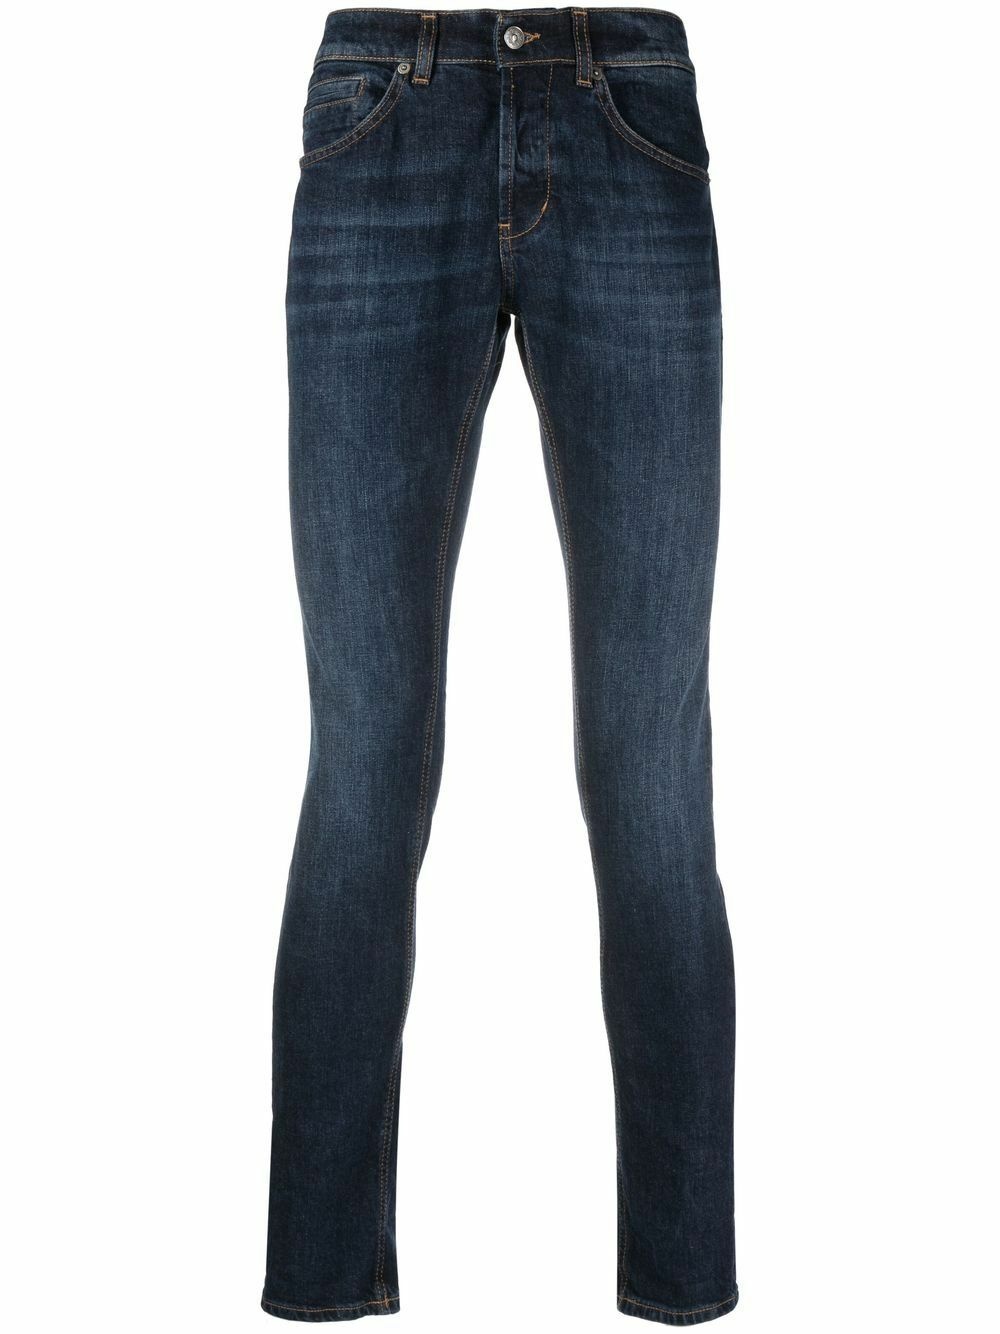 DONDUP - George Jeans Dondup